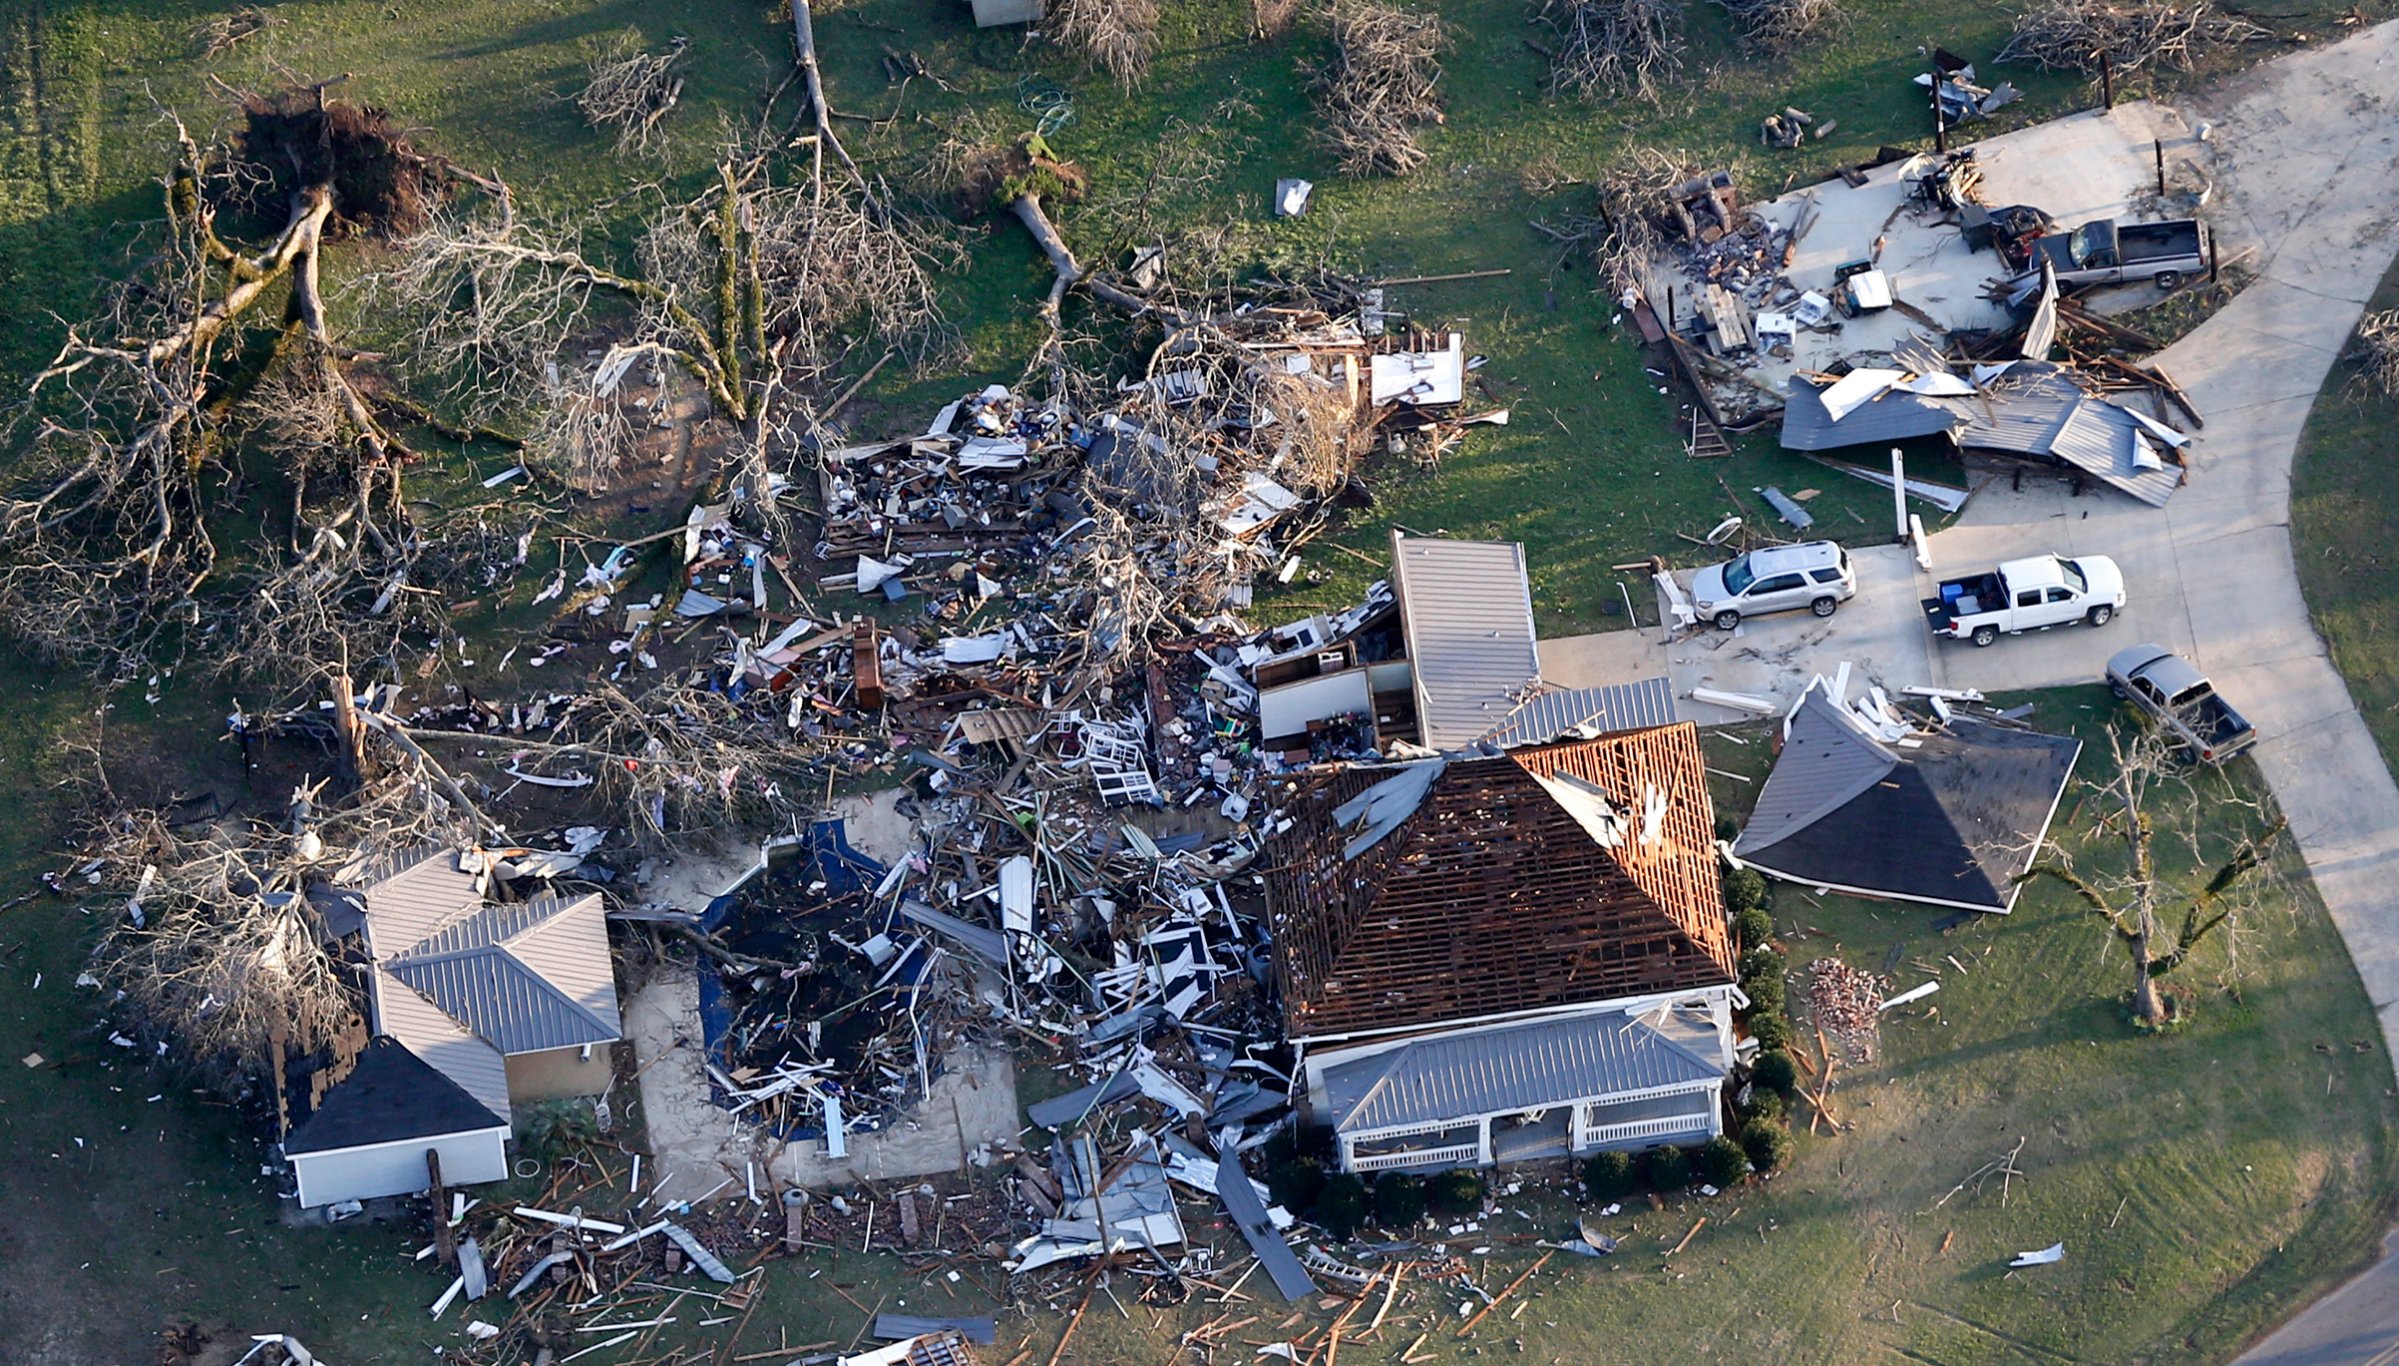 In Lee County, Alabama, a tornado left a path of destruction more than 26 miles long on March 3